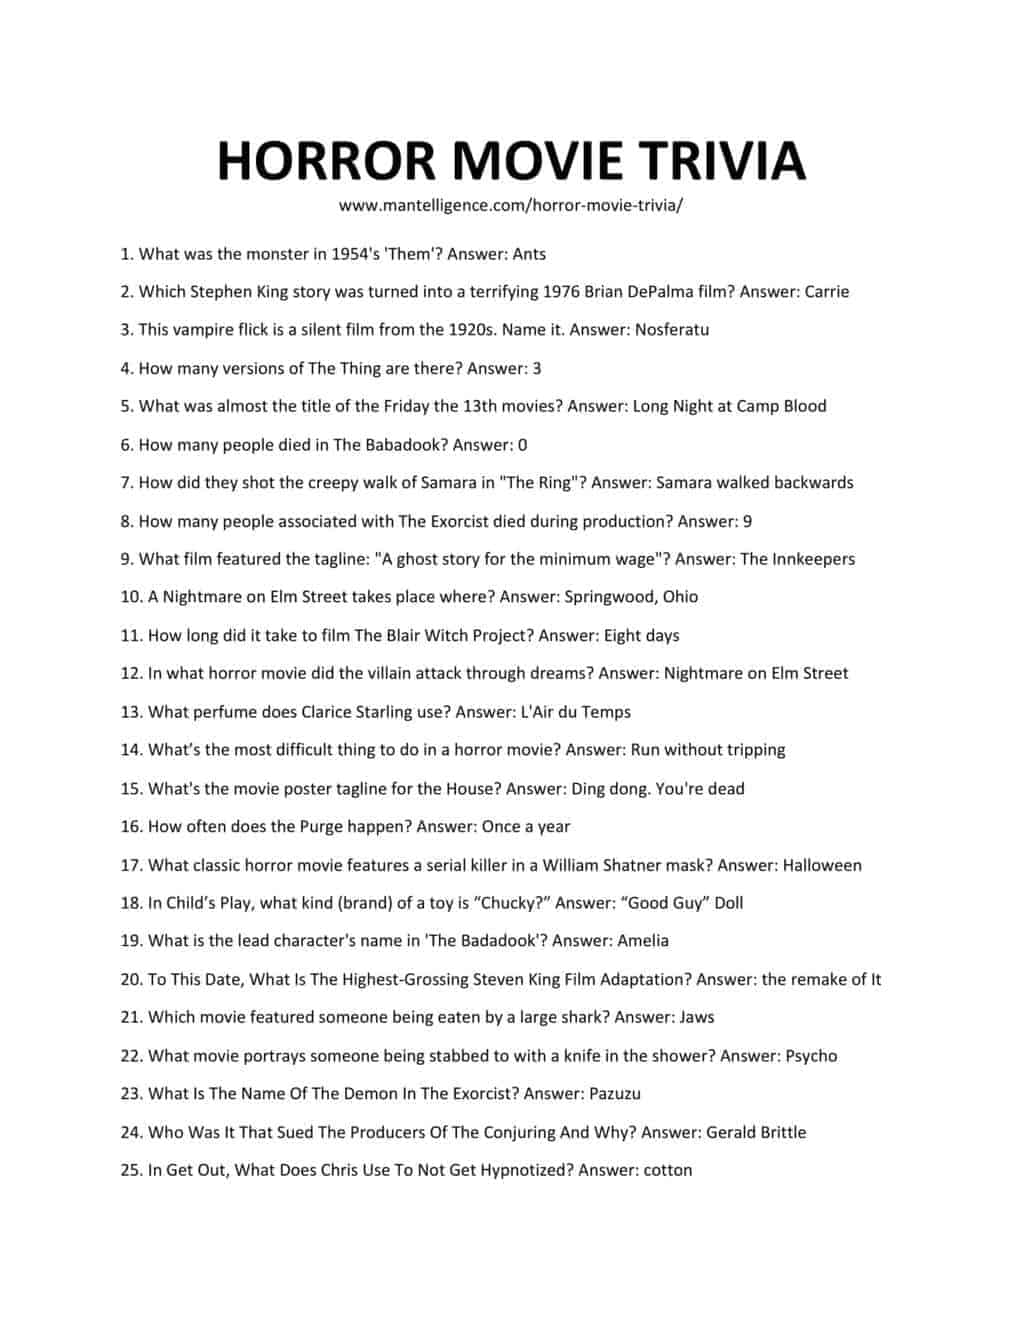 Downloadable and printable jpg/pdf list of horror movie trivia